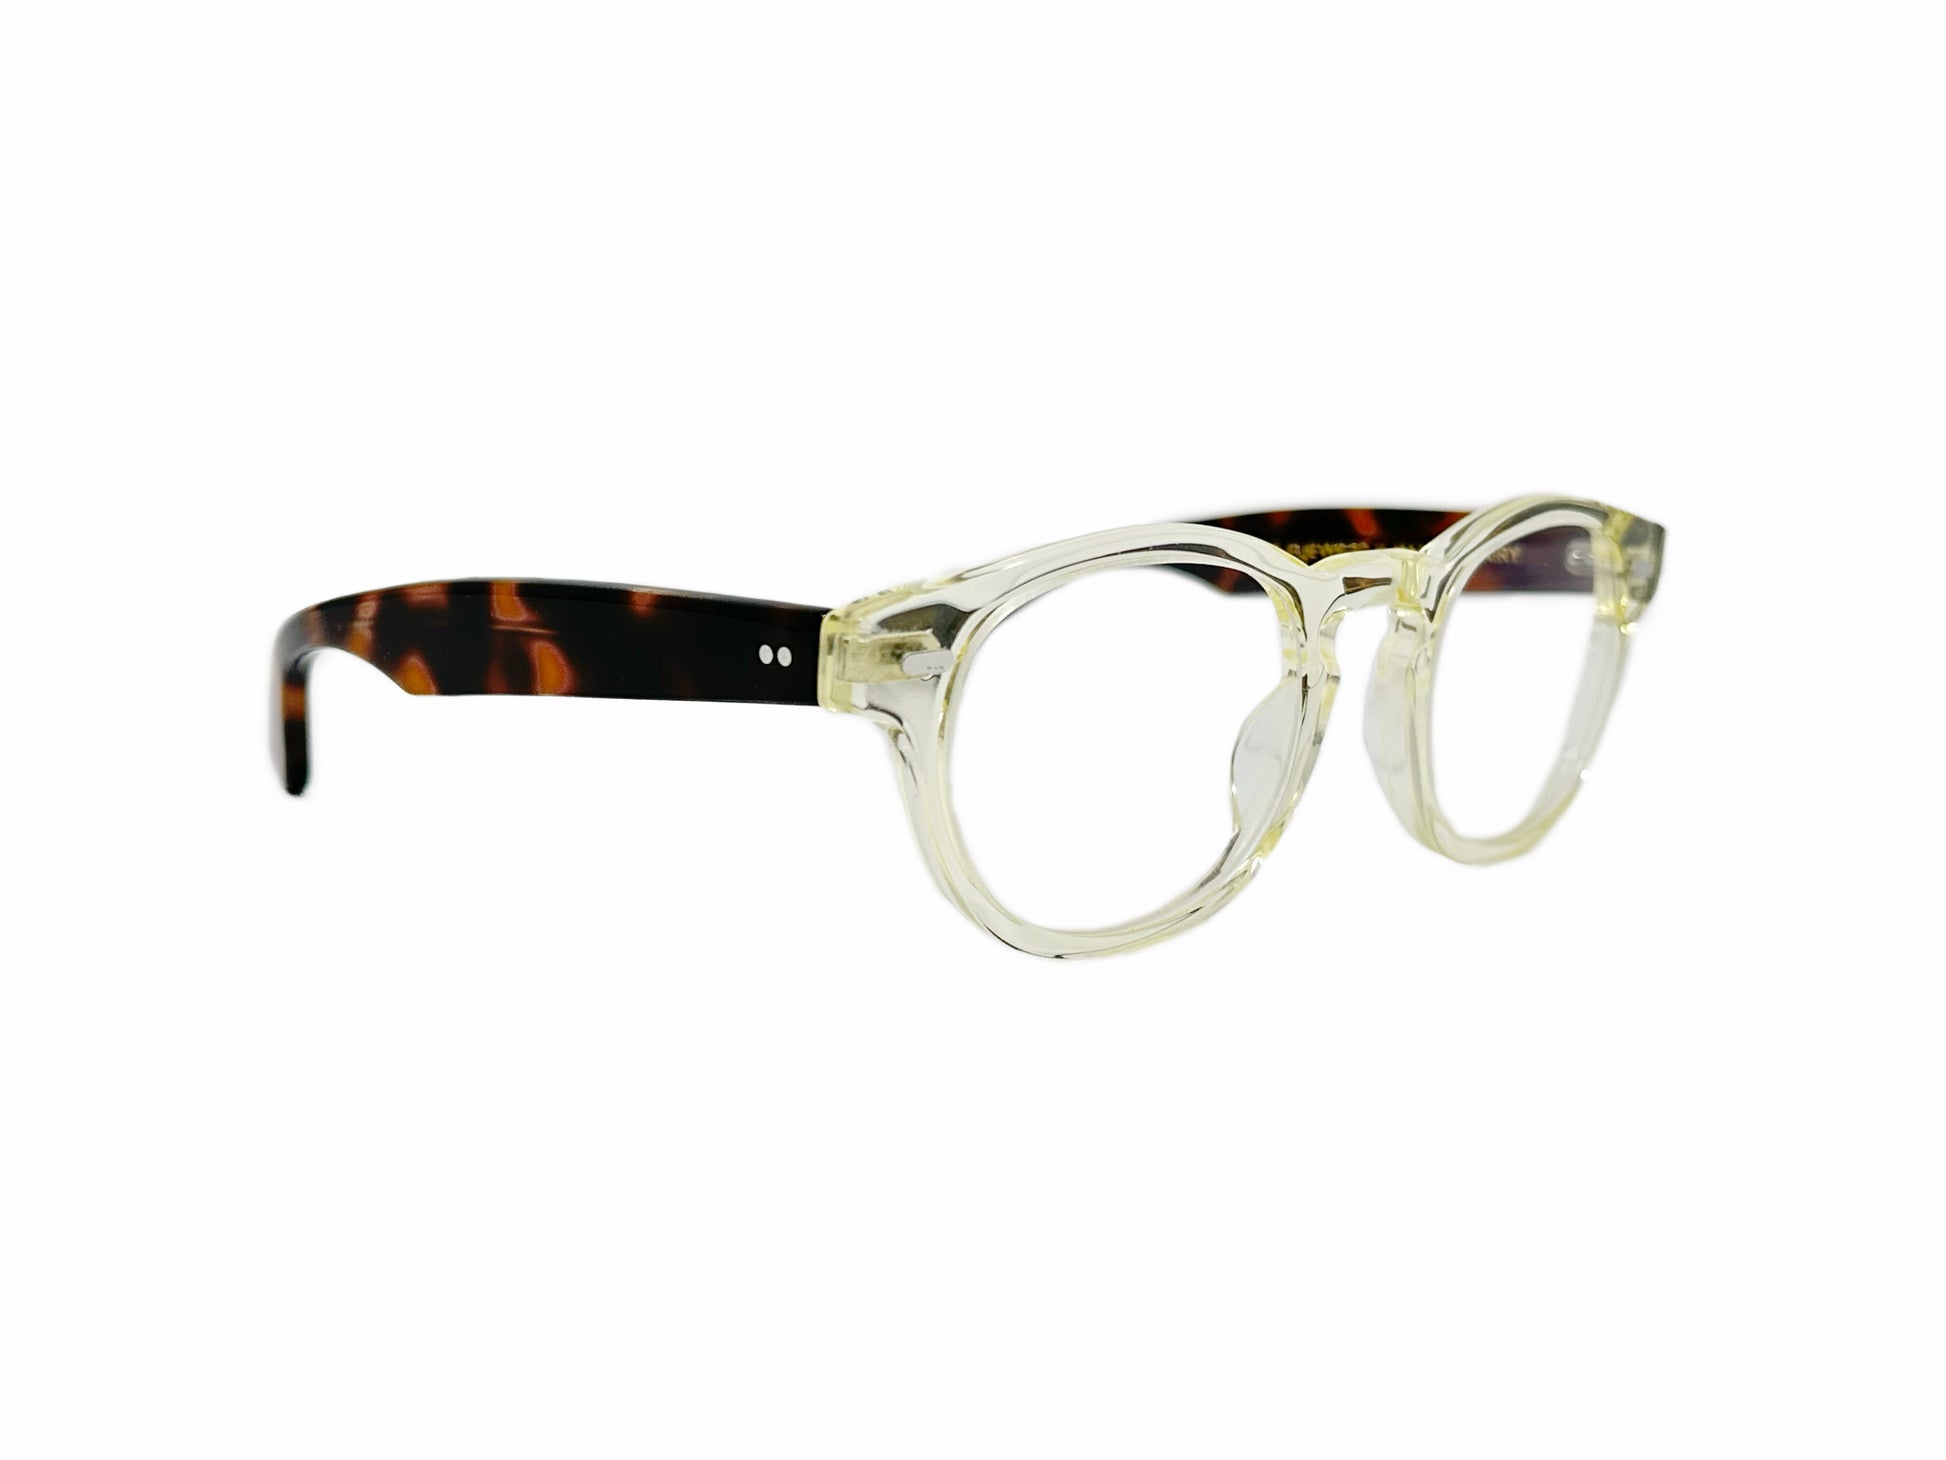 Kala Eyewear rounded-square, acetate, optical frame. Model: Kalifornia. Color: CHA- clear. Side view.